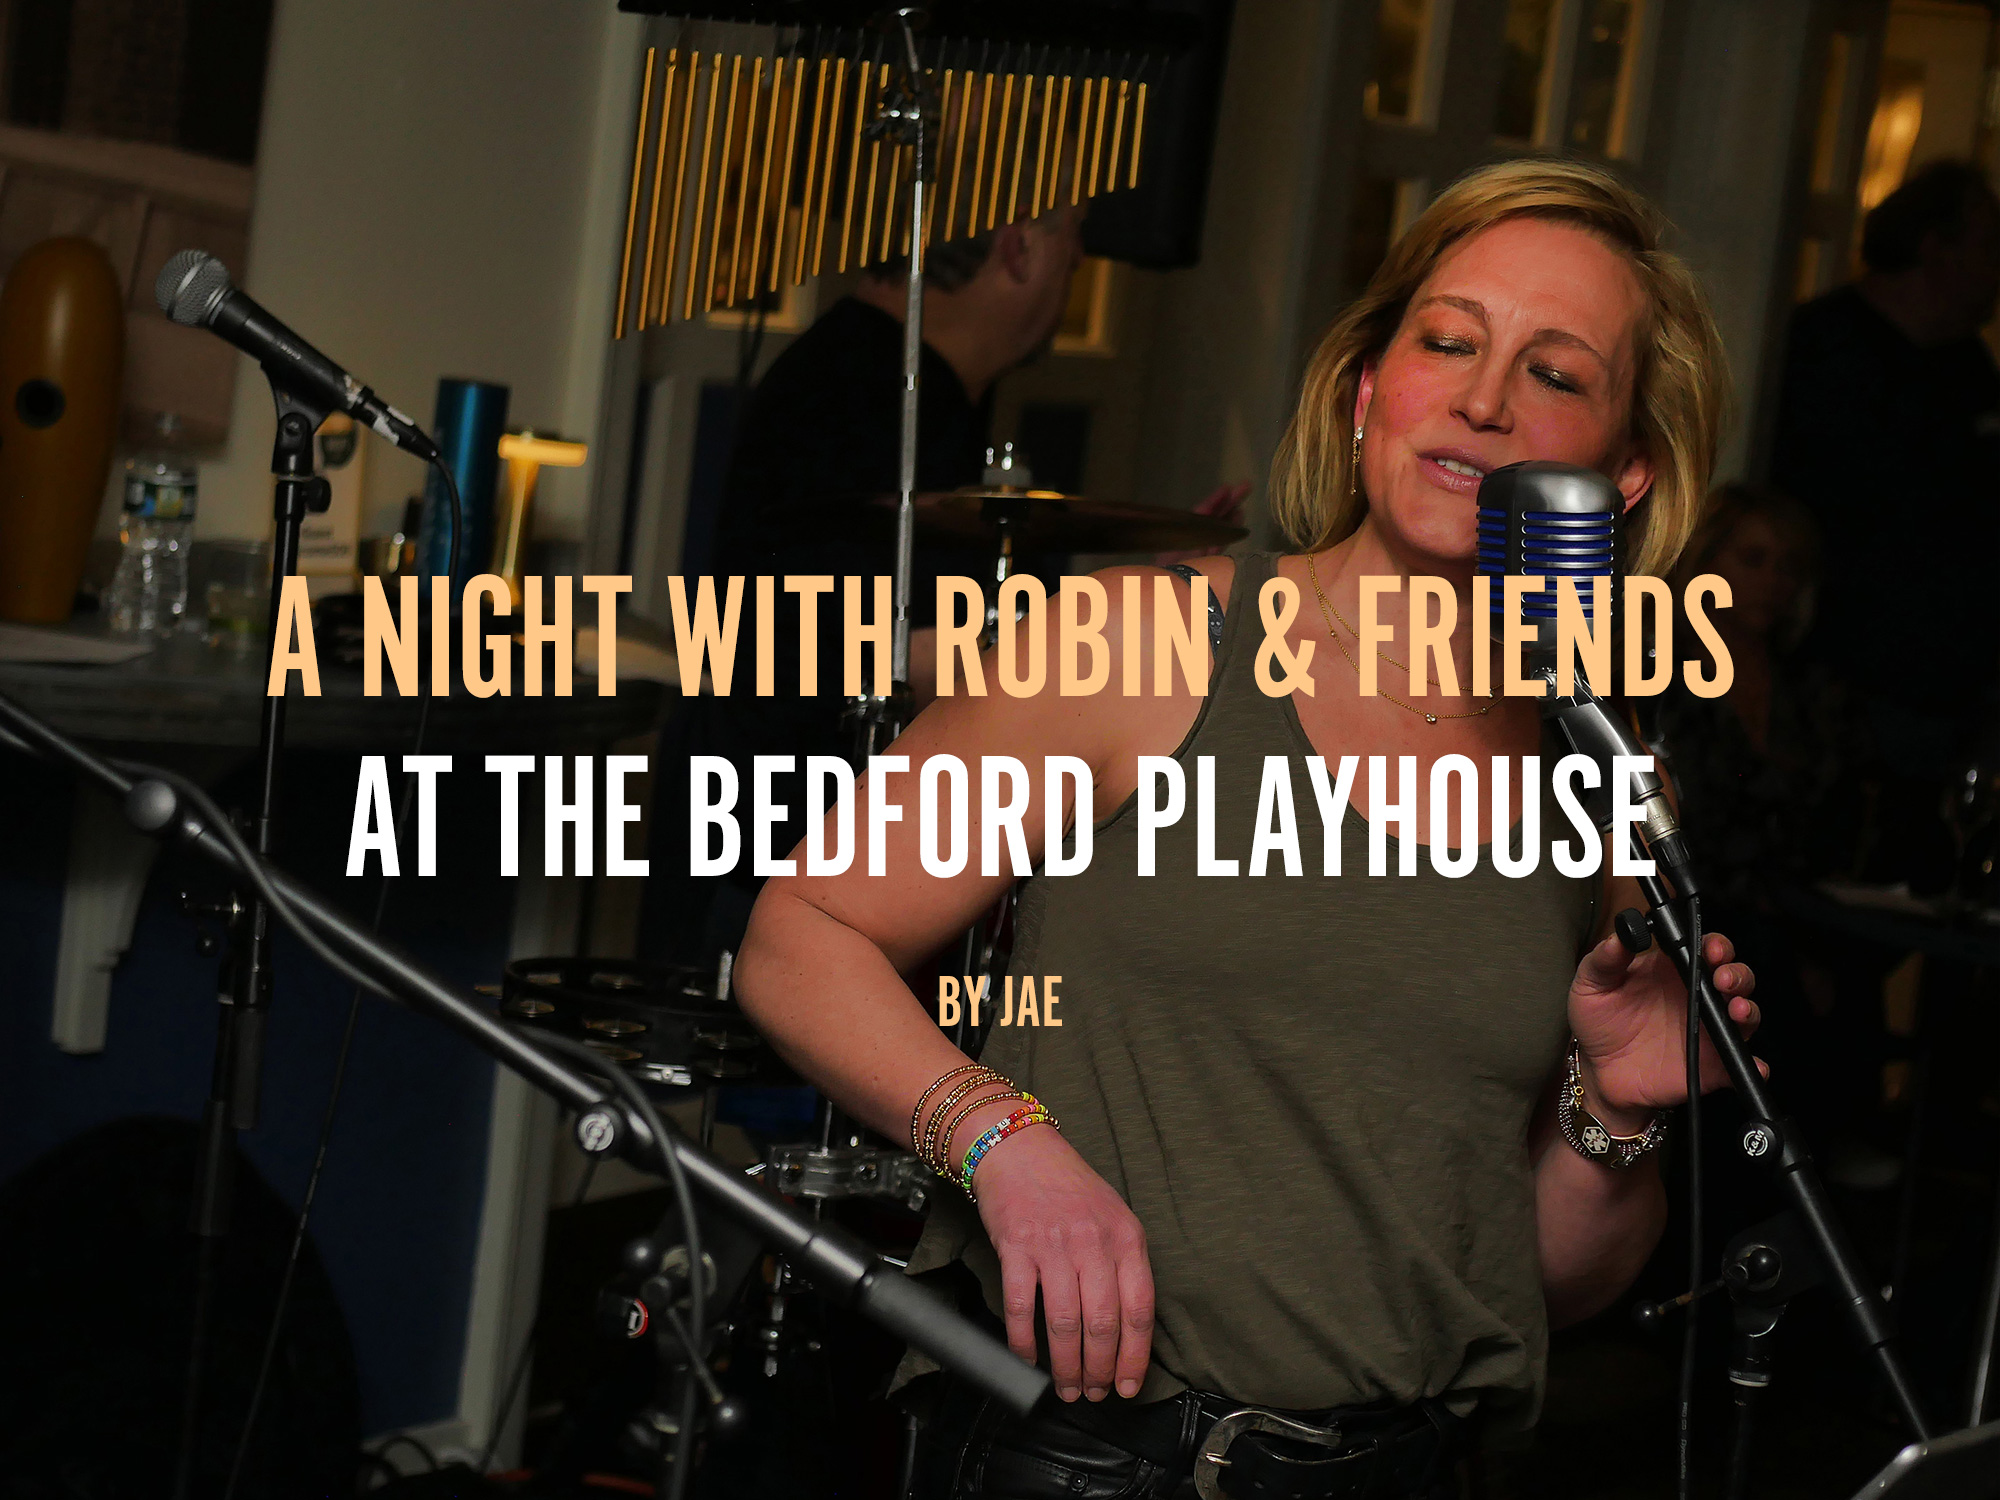 A Night with Robin & Friends at The Bedford Playhouse